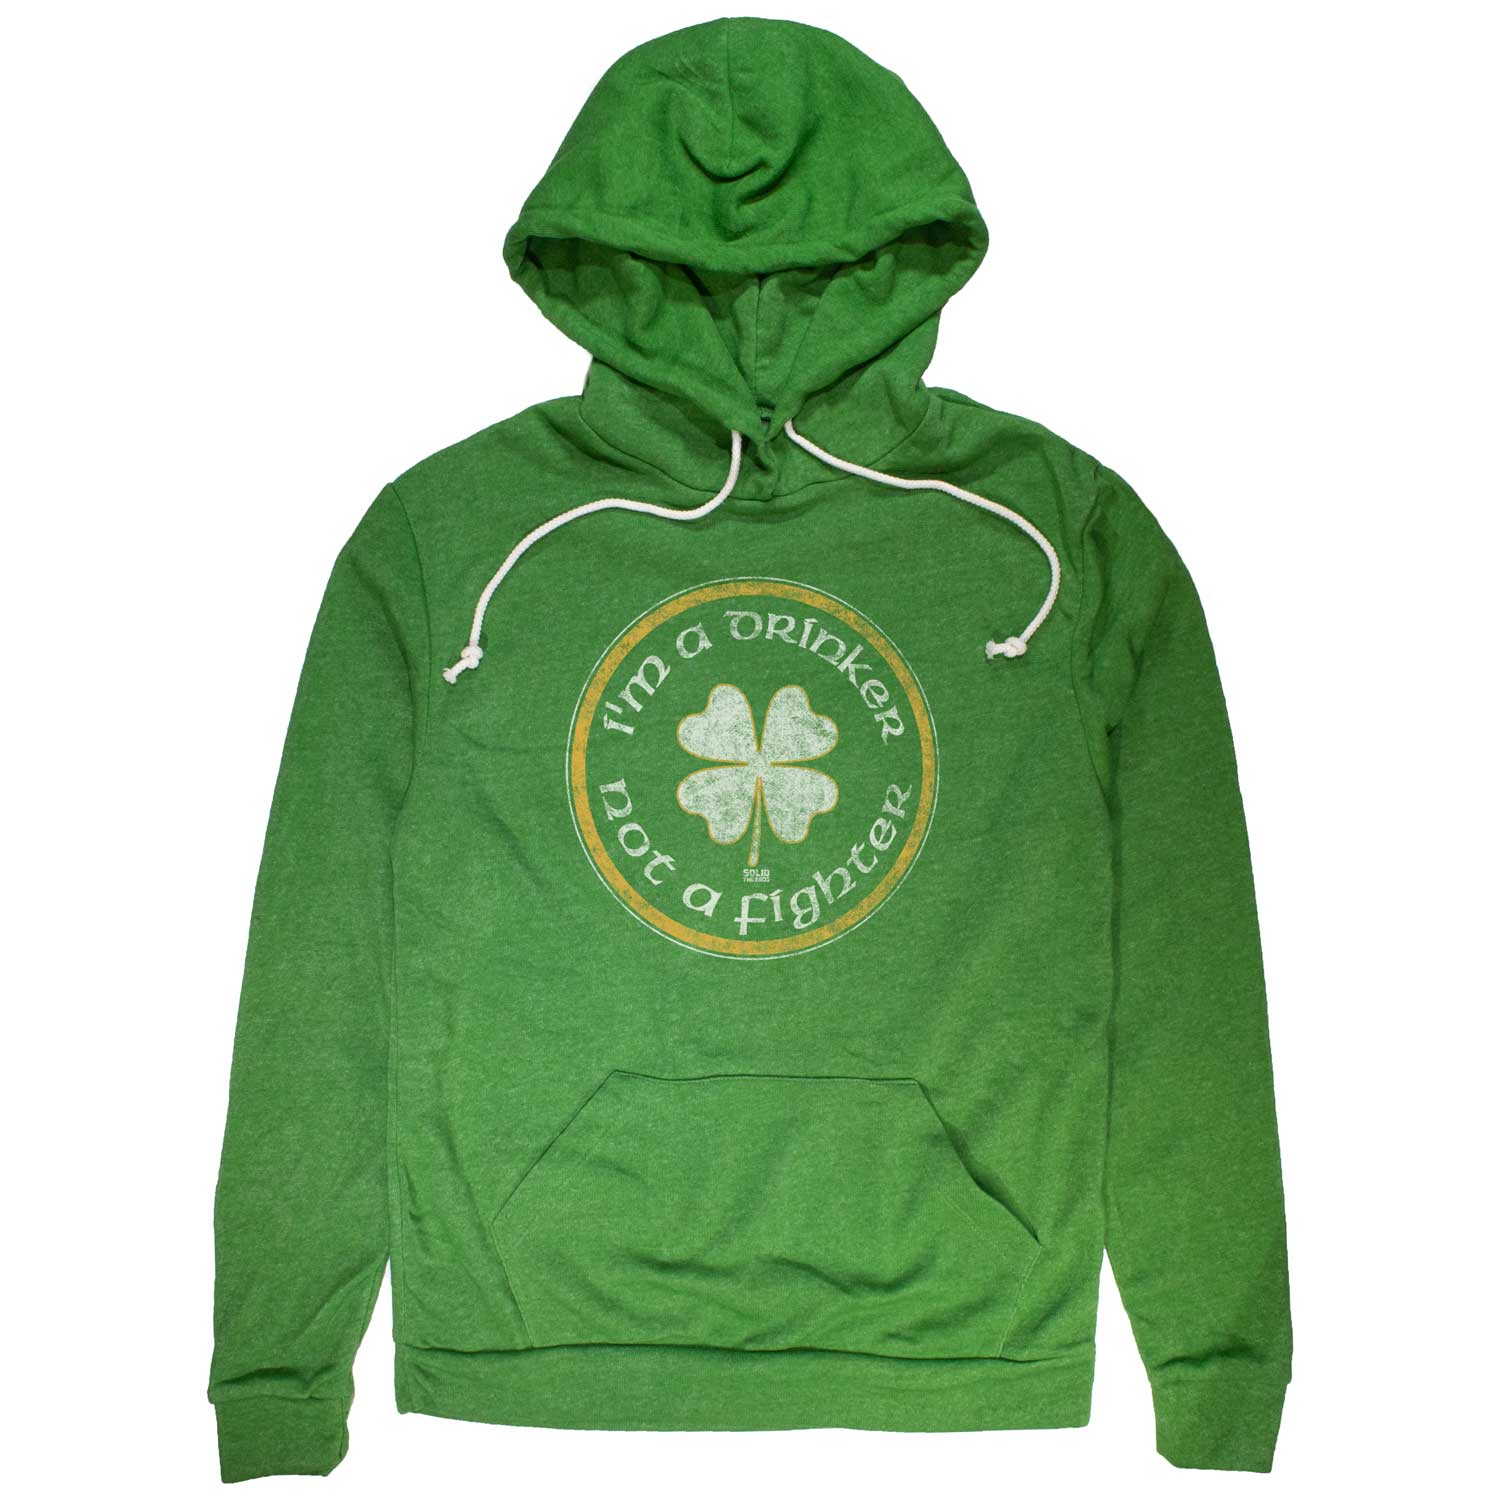 Drinker Not A Fighter Vintage Pullover Hoodie | Funny  Irish St. Paddy's Graphic | Solid Threads